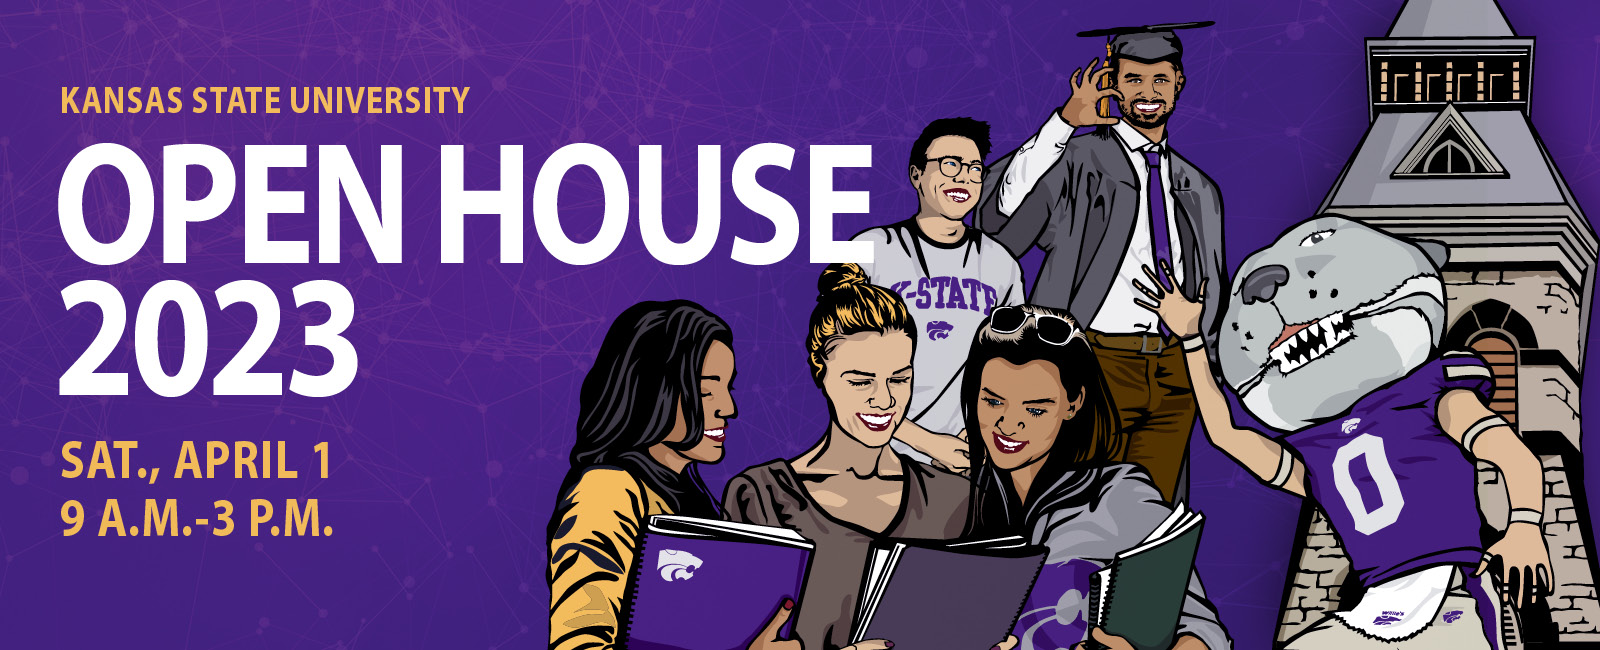 K-State Open House April 1, 2023